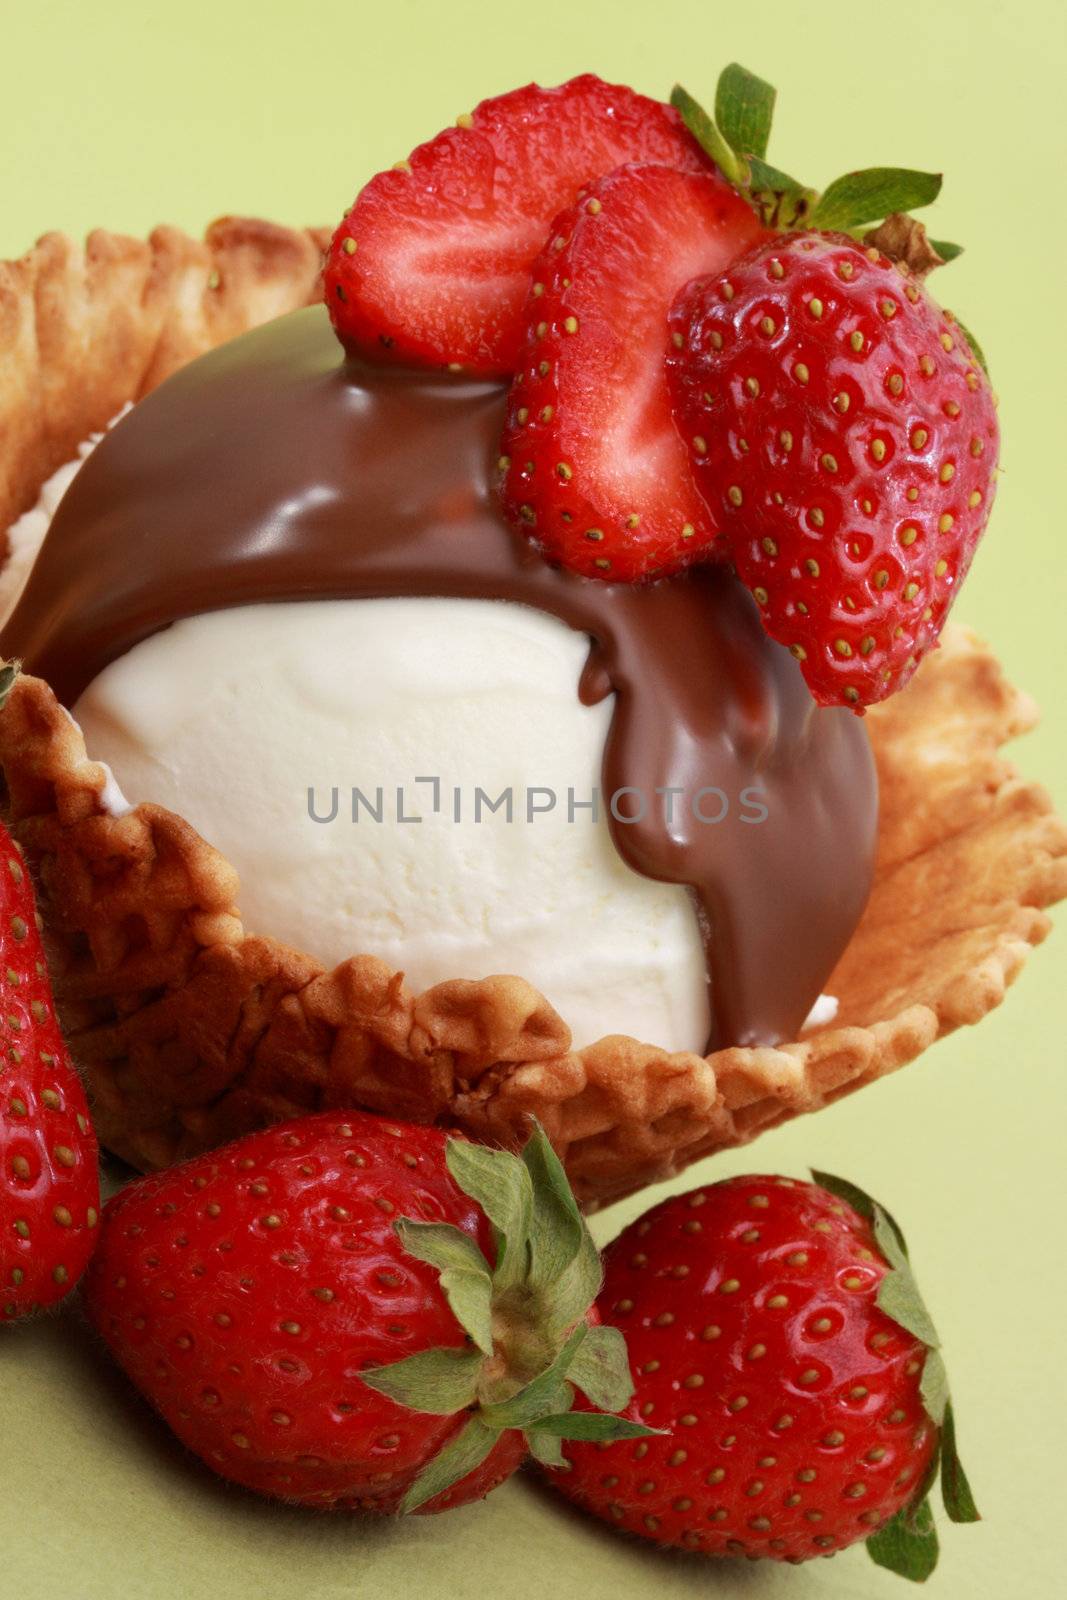 vanilla ice-cream in a wafer basket with chocolate and strawberries